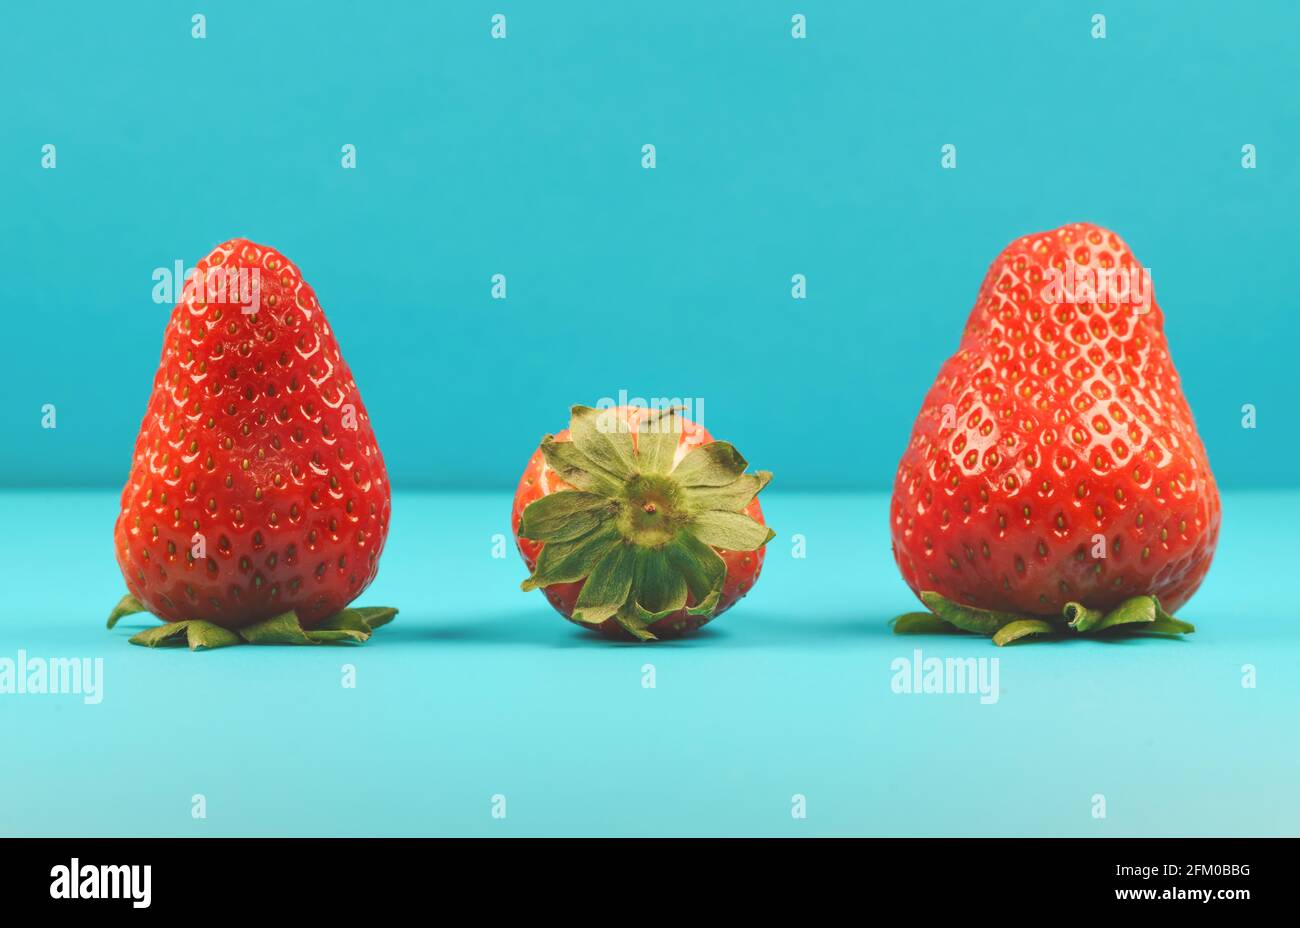 Detail of three fresh red strawberries on turquoise background as a symbol for summer and happiness Stock Photo